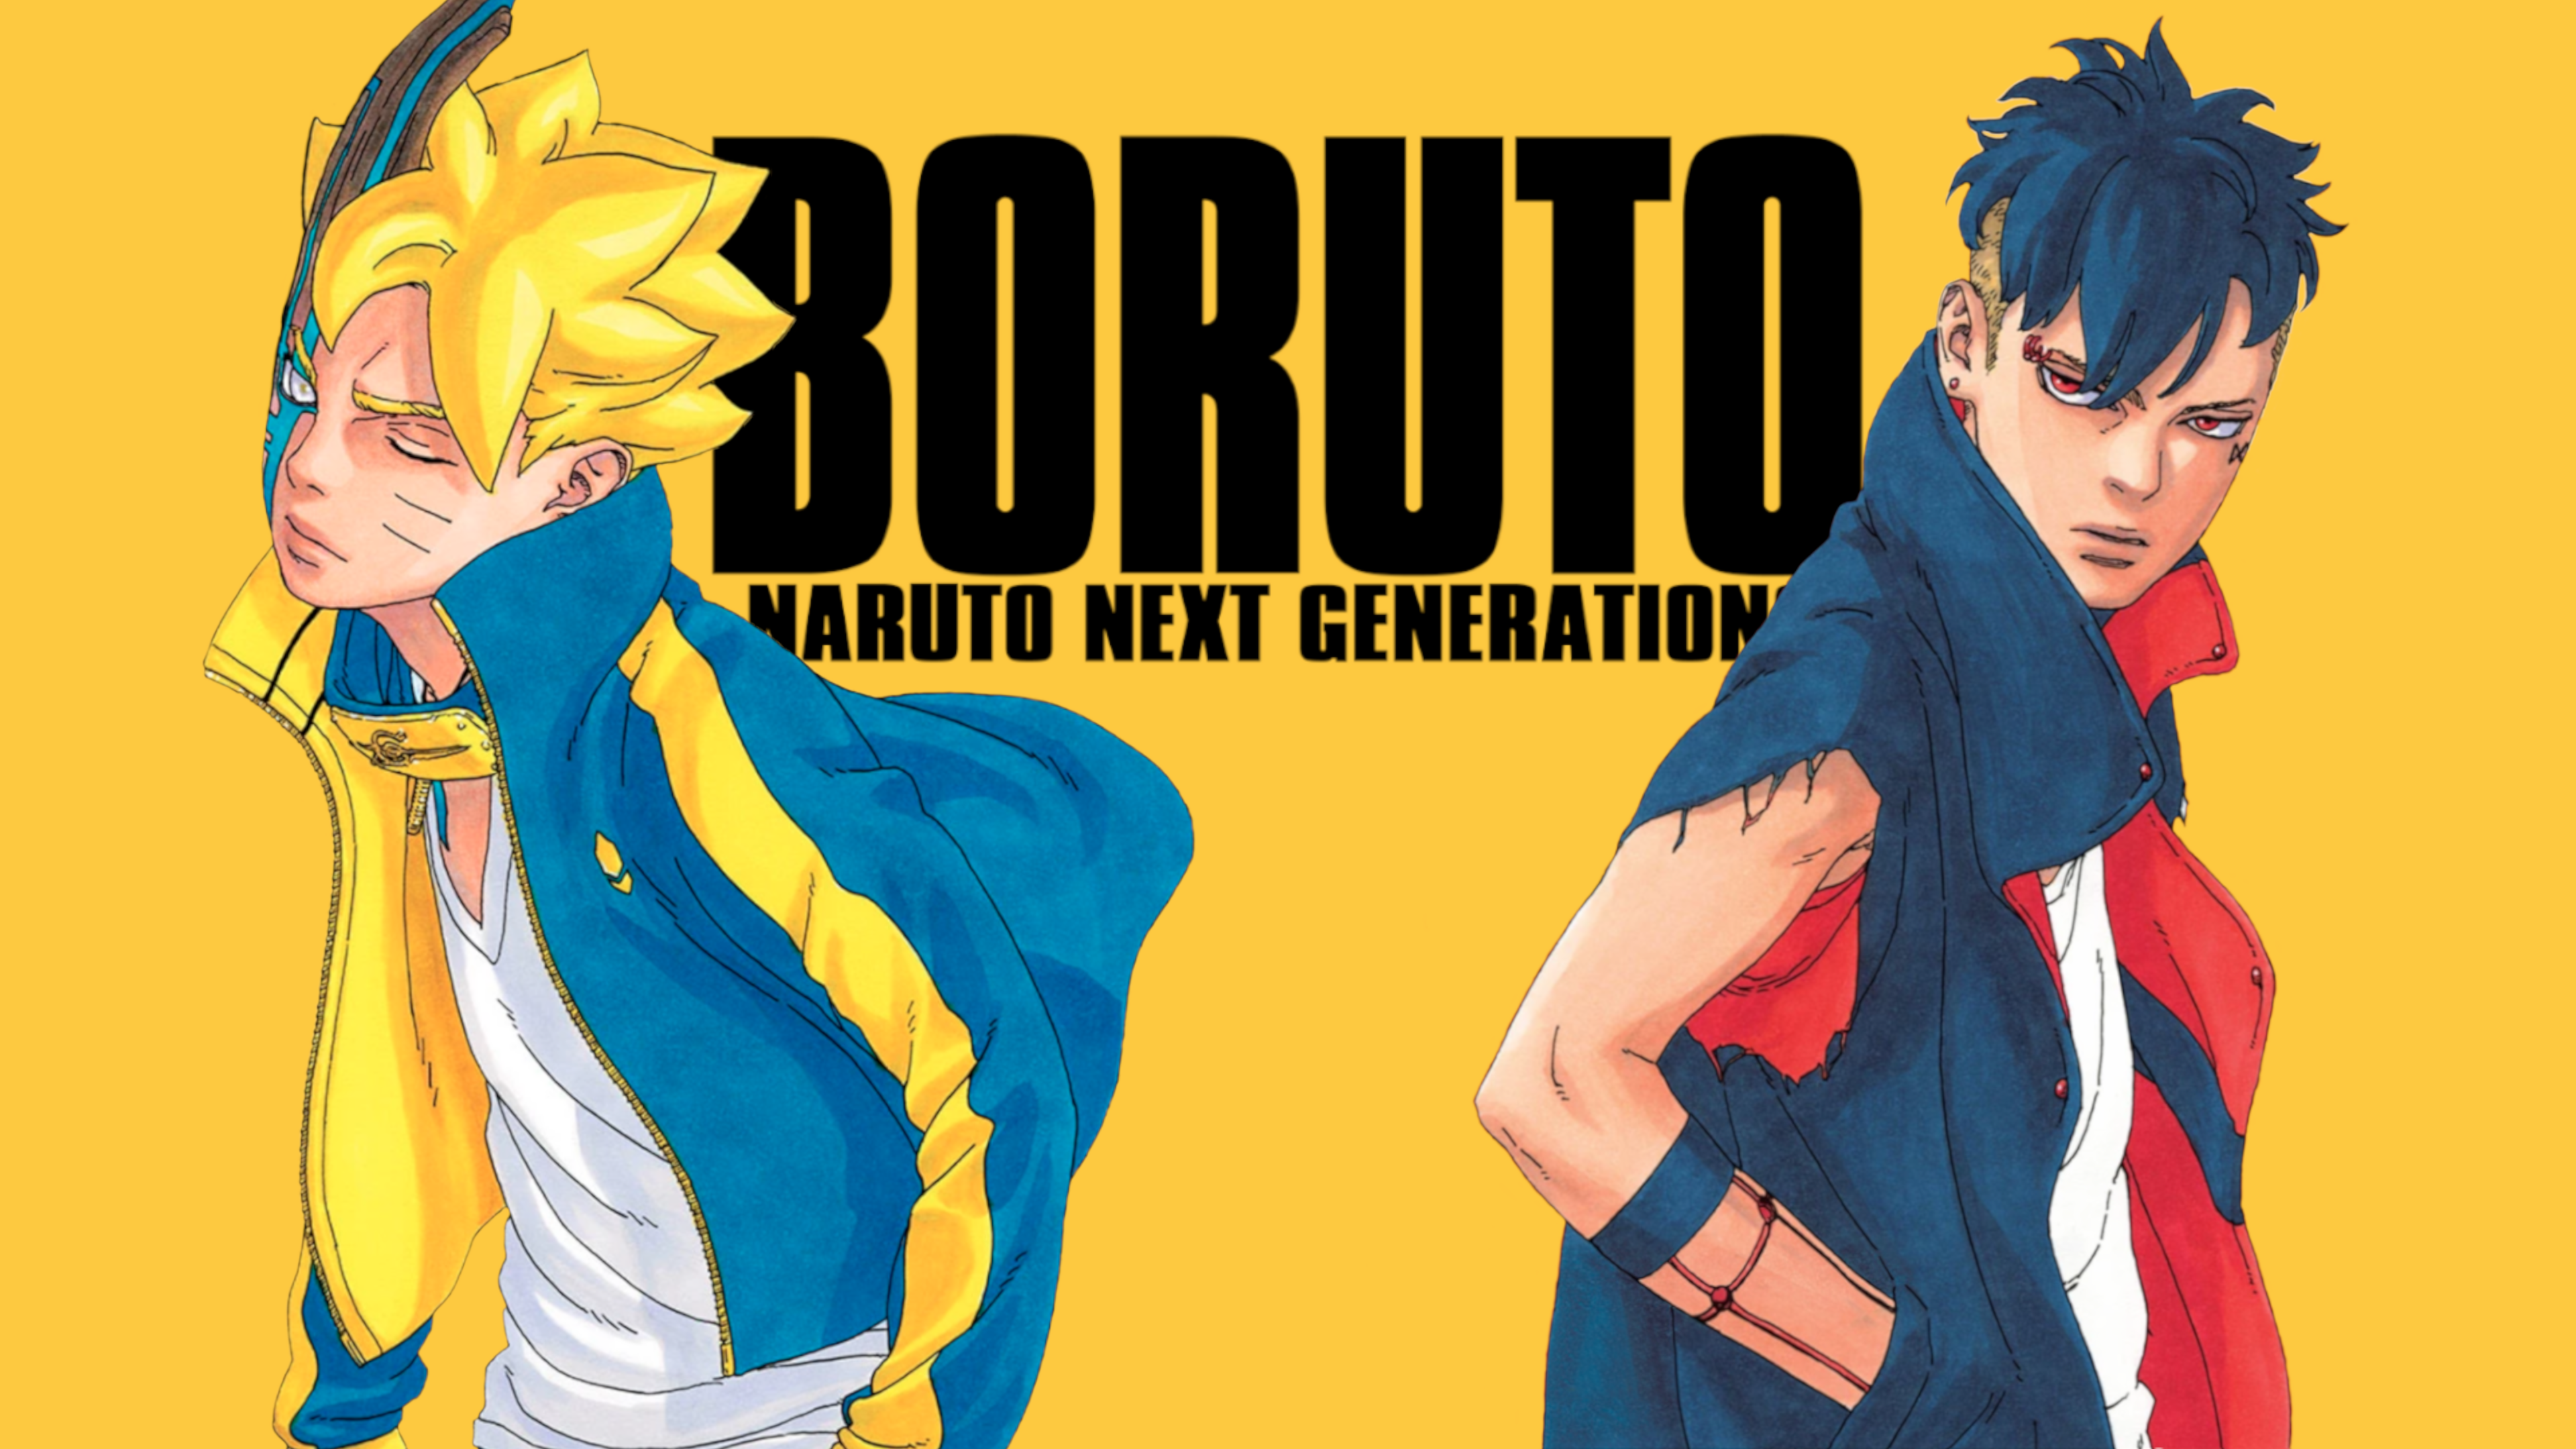 Boruto Kawaki Wallpaper From Recent Chapter Covers I Made In PS And AI, Hope You Like It! Download Link In The Comments